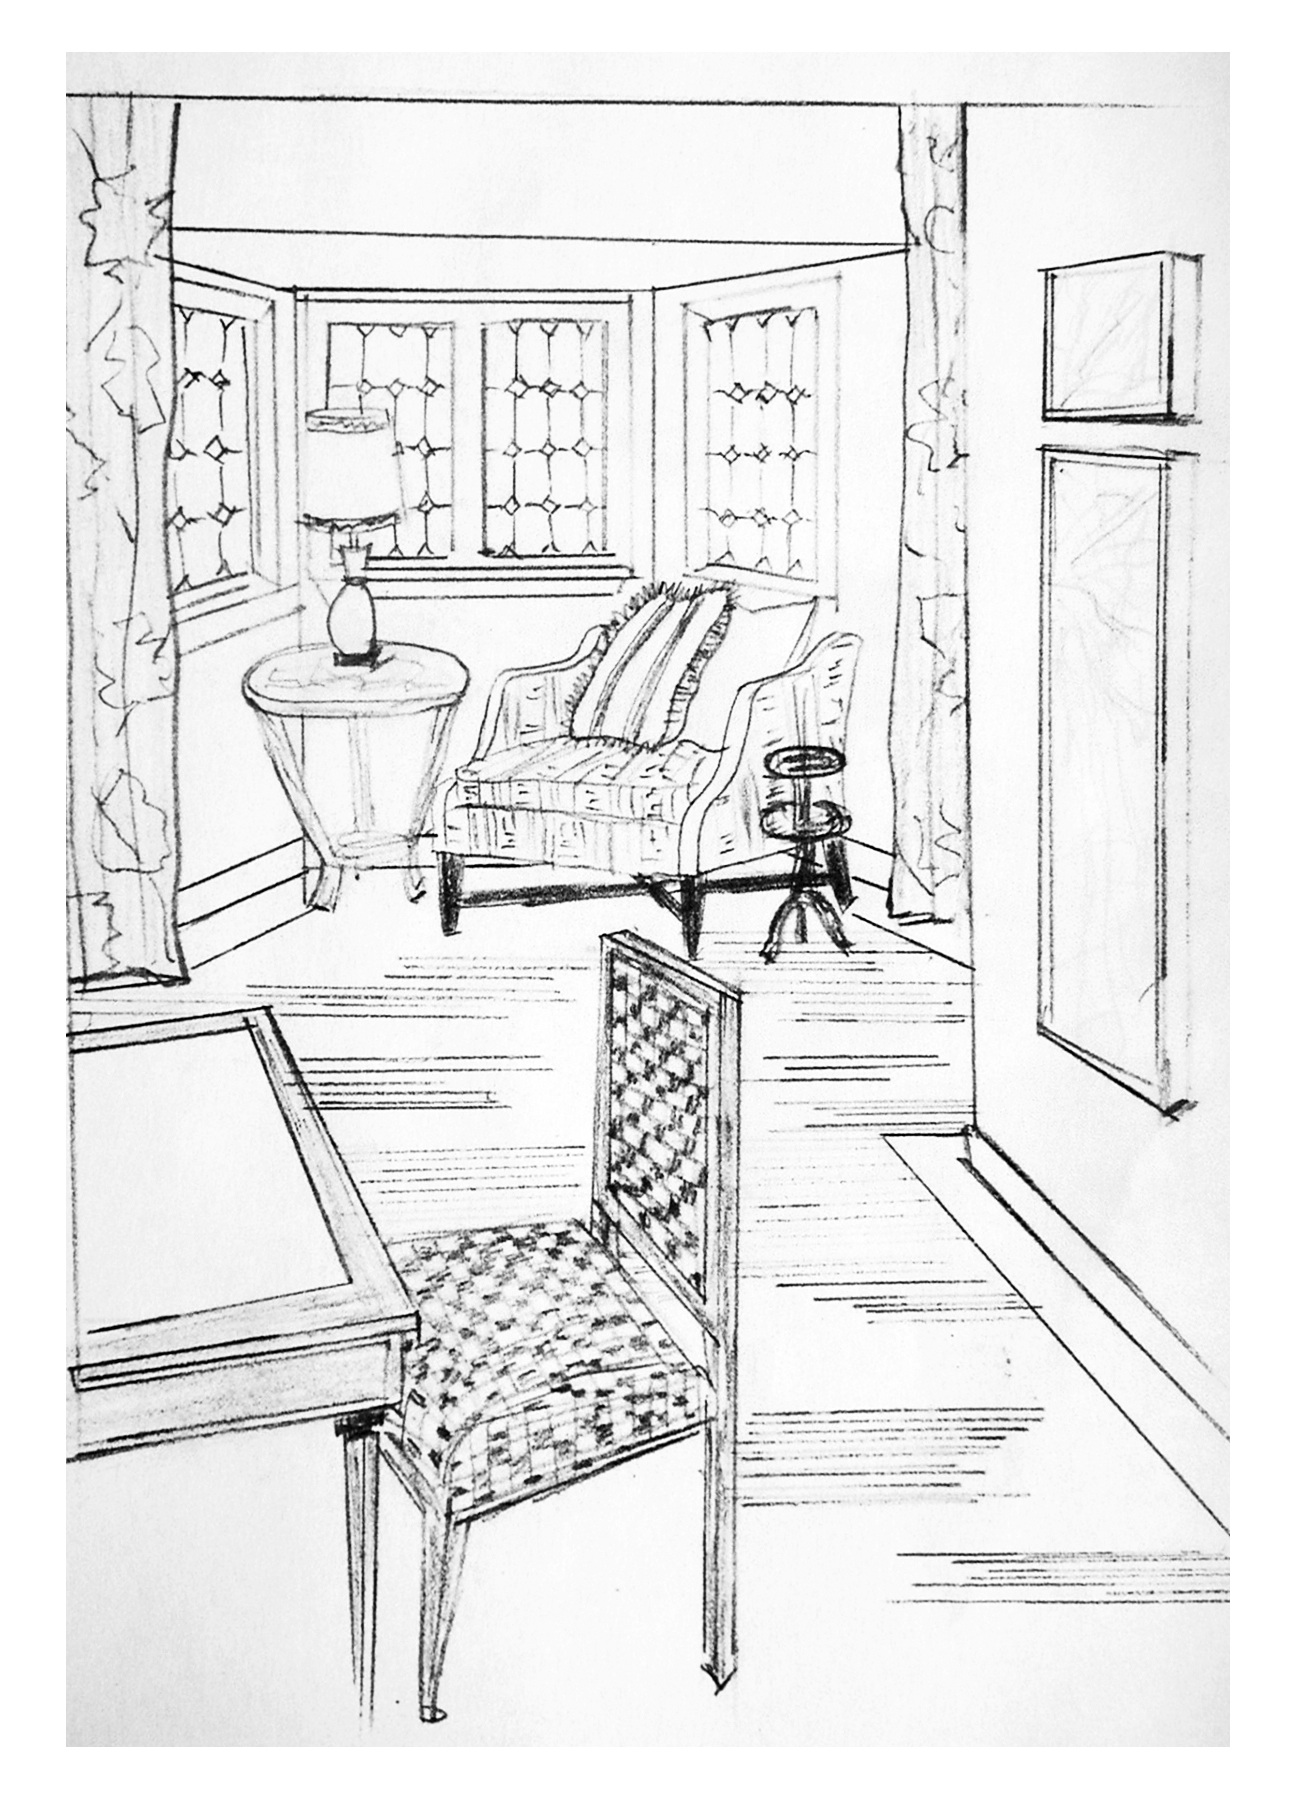 Inside House Sketch at Explore collection of